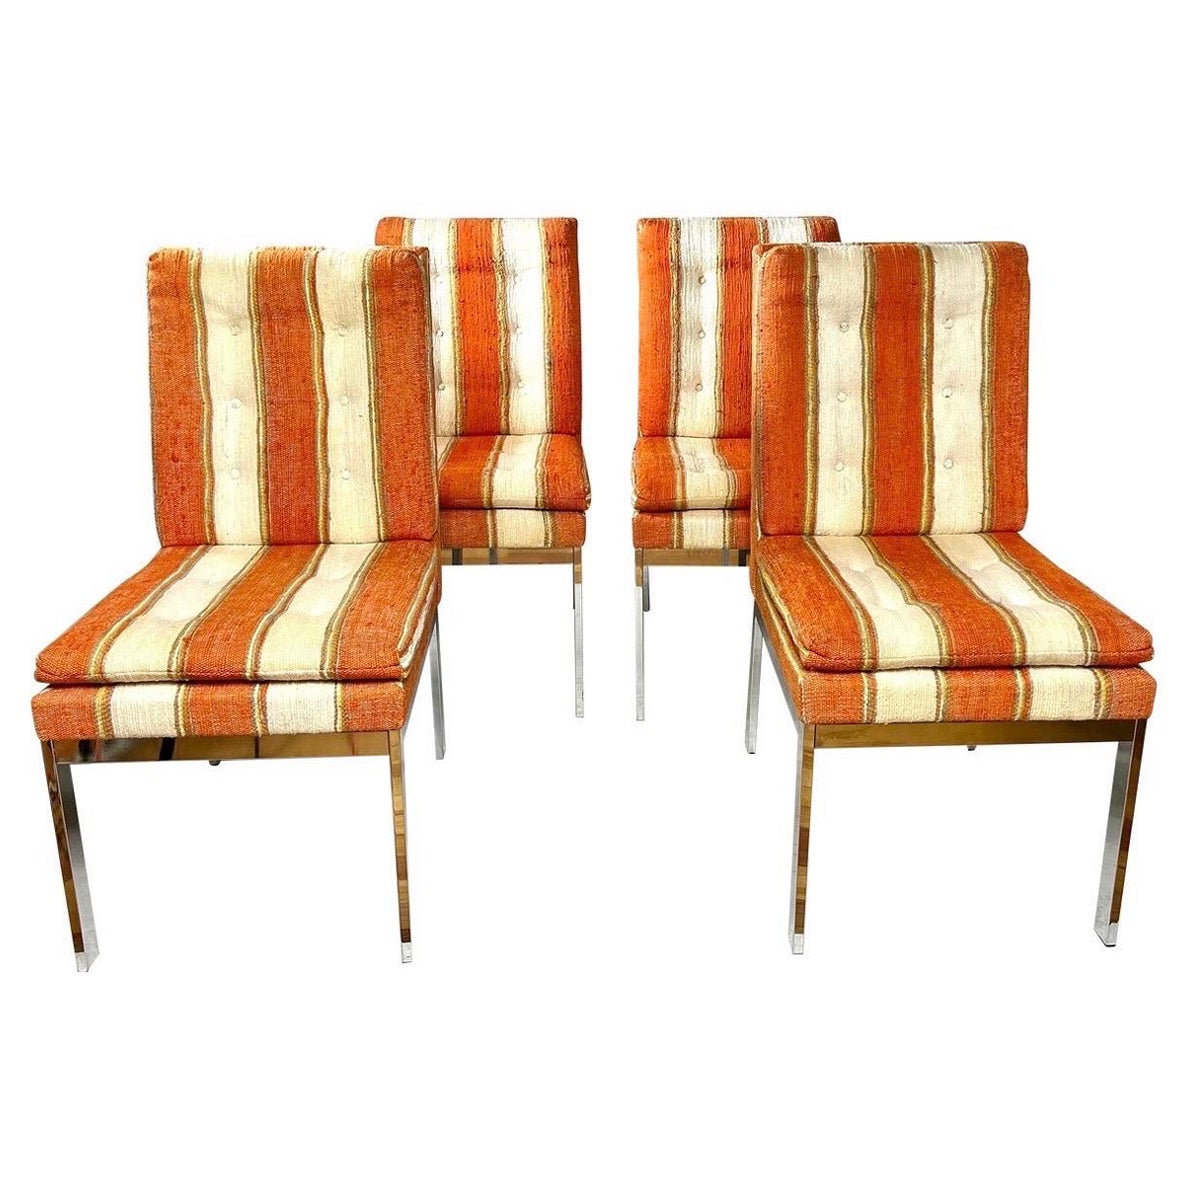 1970s Design Institute of America Chrome Parsons Chairs - Set of 4 For Sale